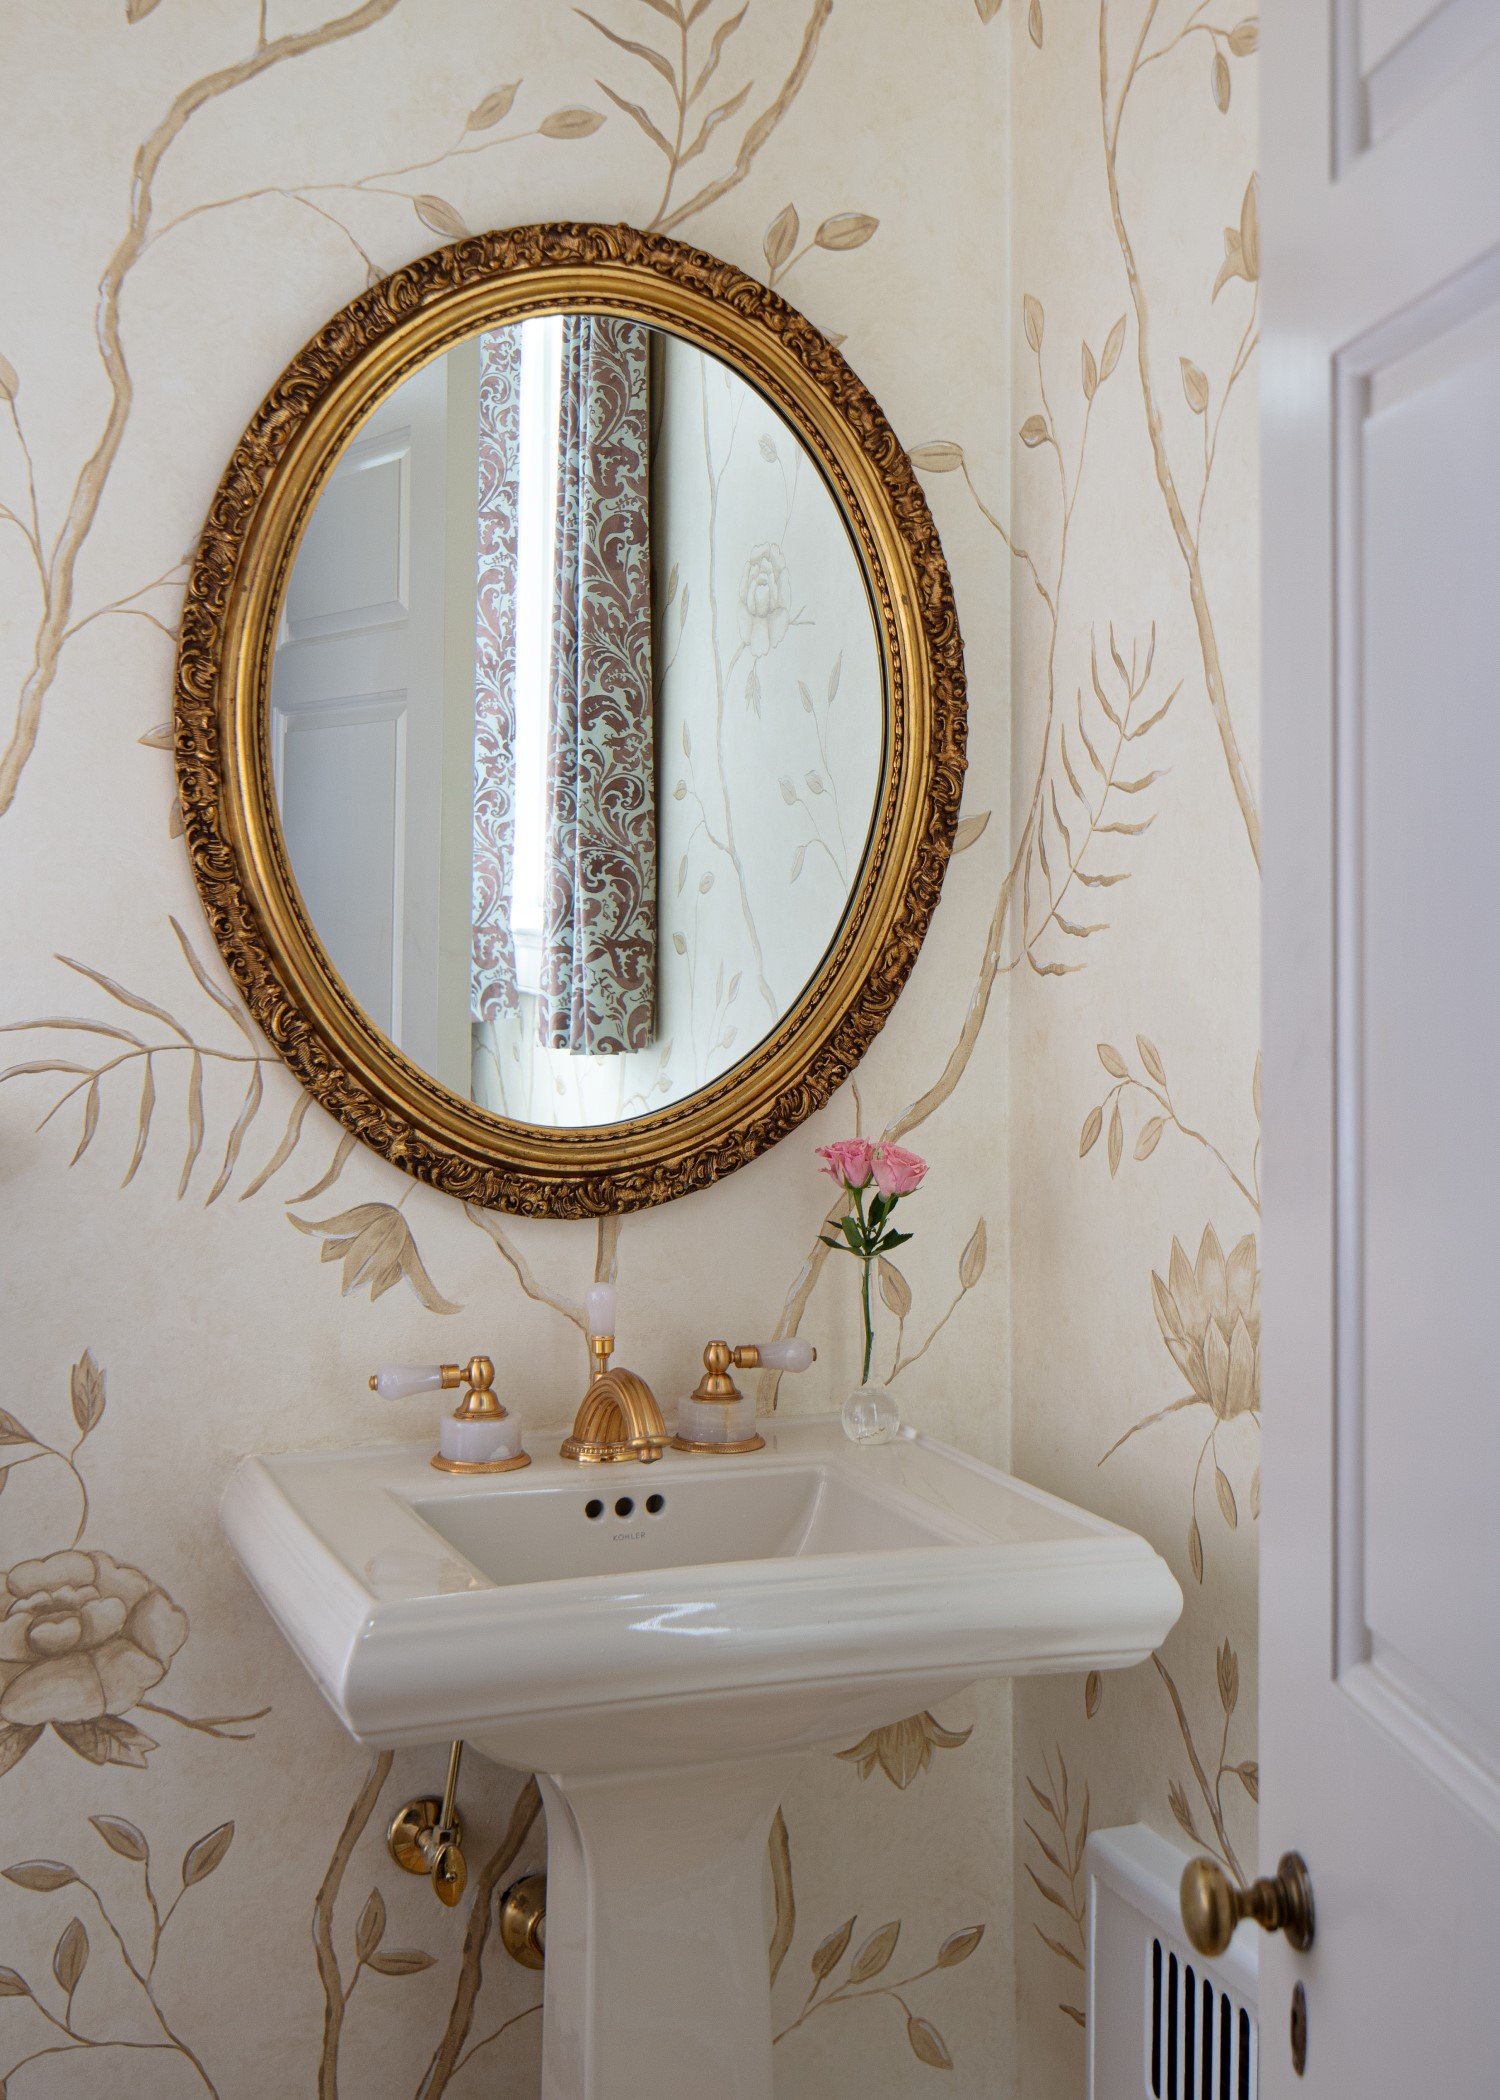  Powder room with graceful floral wallpaper, a gold oval mirror, and a pedestal sink, the elegance achieved by Bridget Beari Designs 